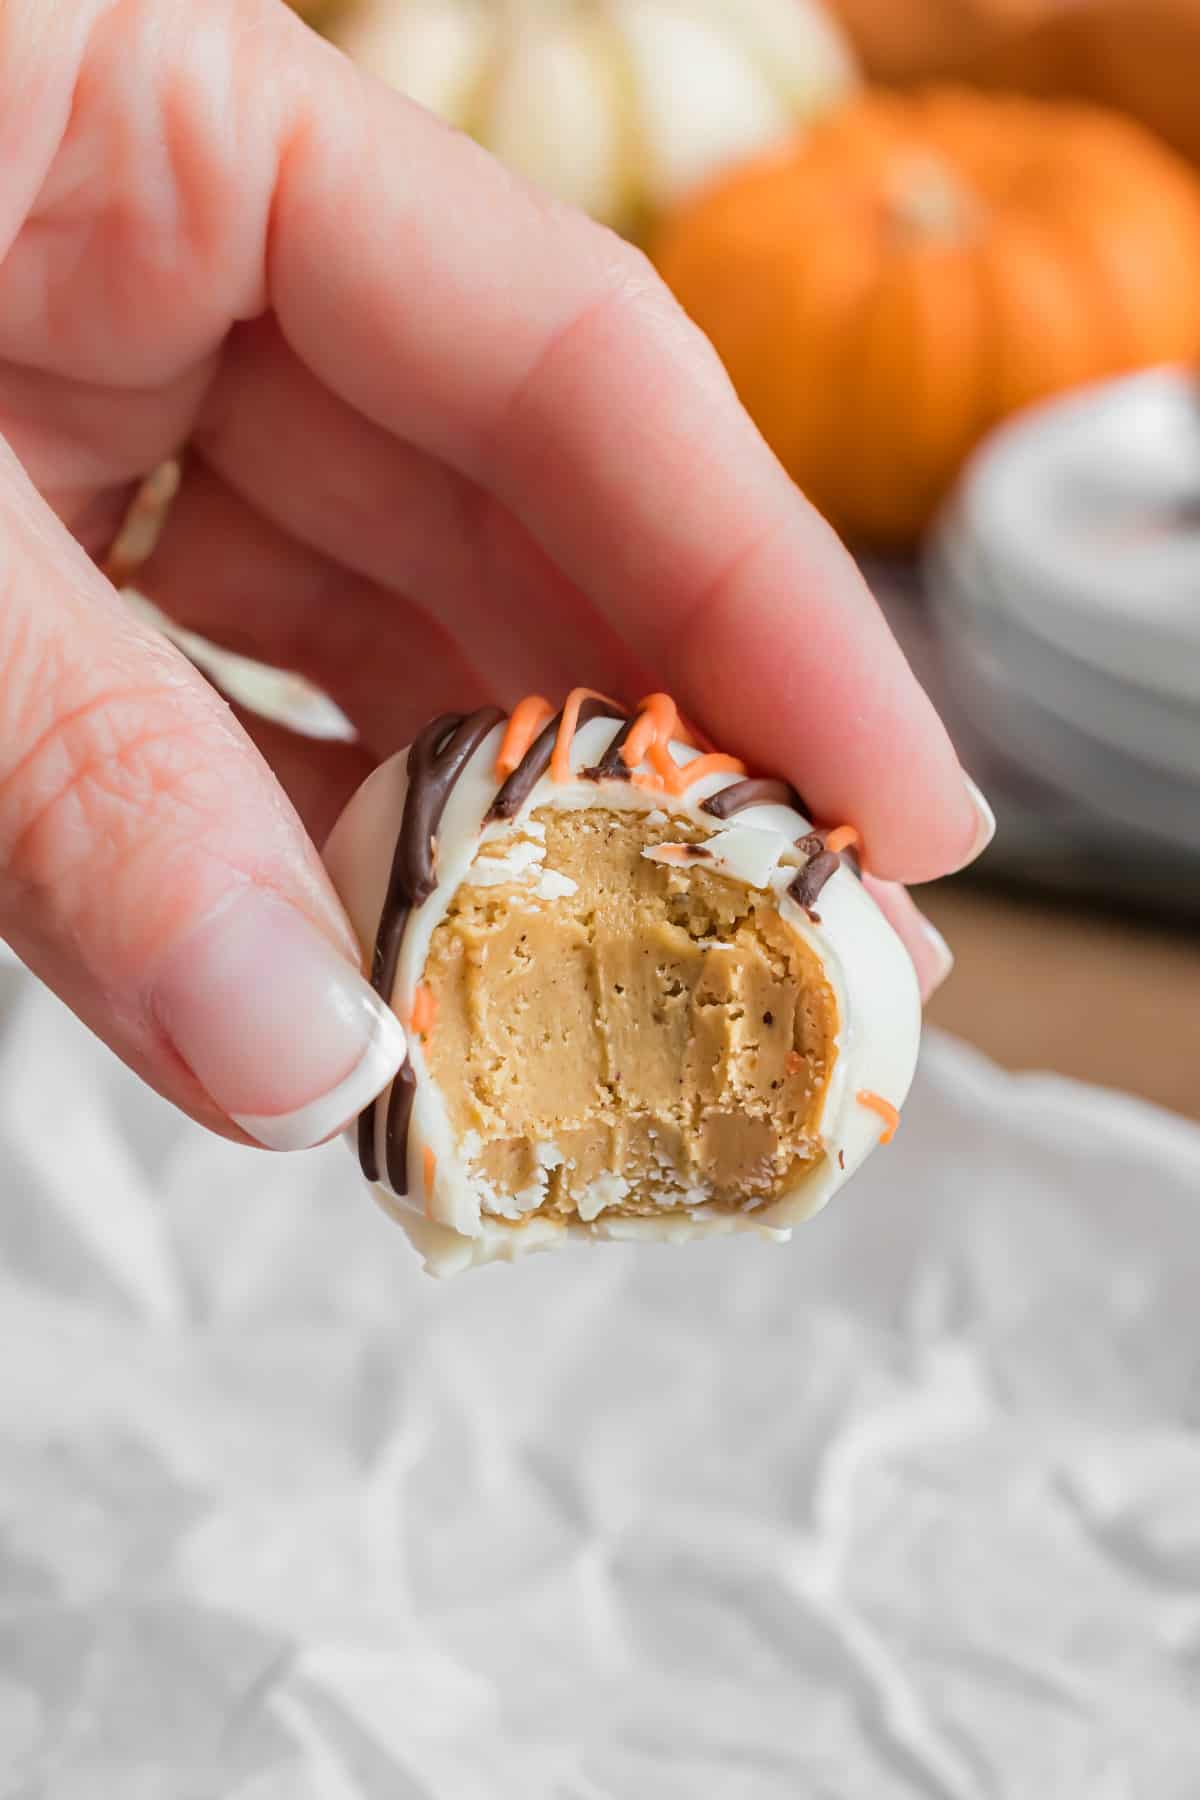 Pumpkin truffle with bite removed.